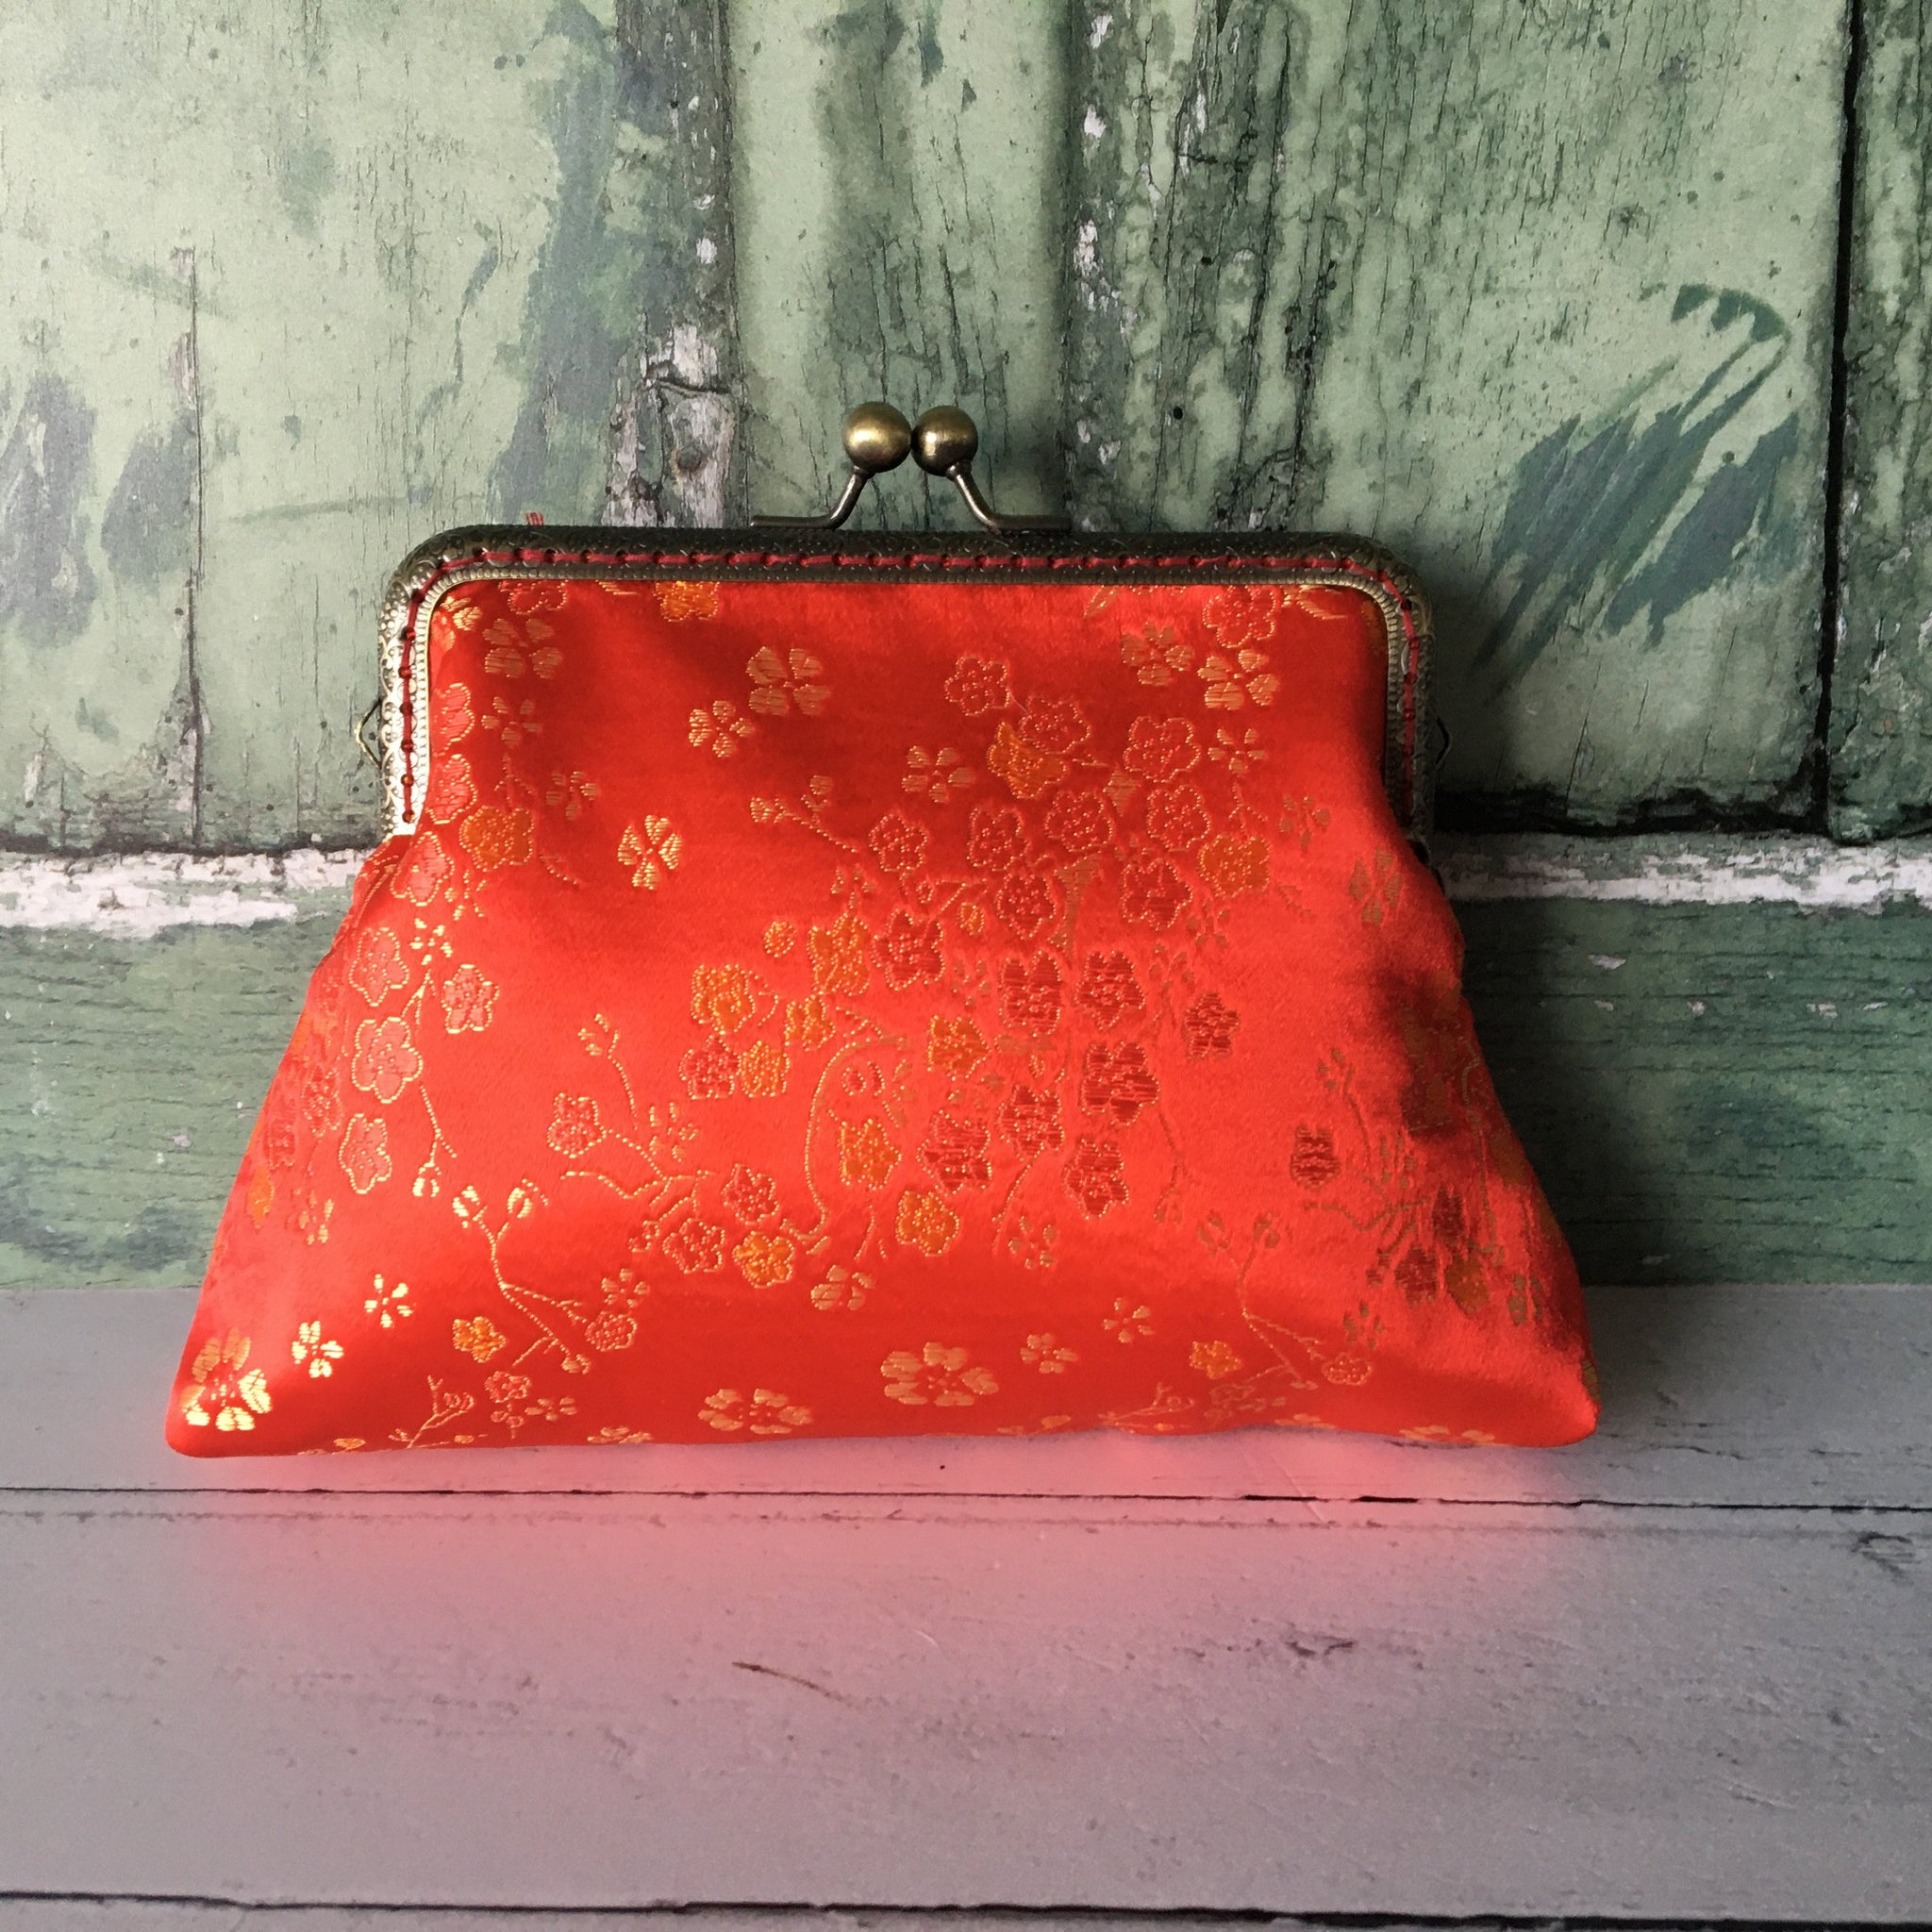 Red and Gold Blossom Embroidered Brocade 5.5 Inch Clasp Purse Frame Clutch Bag